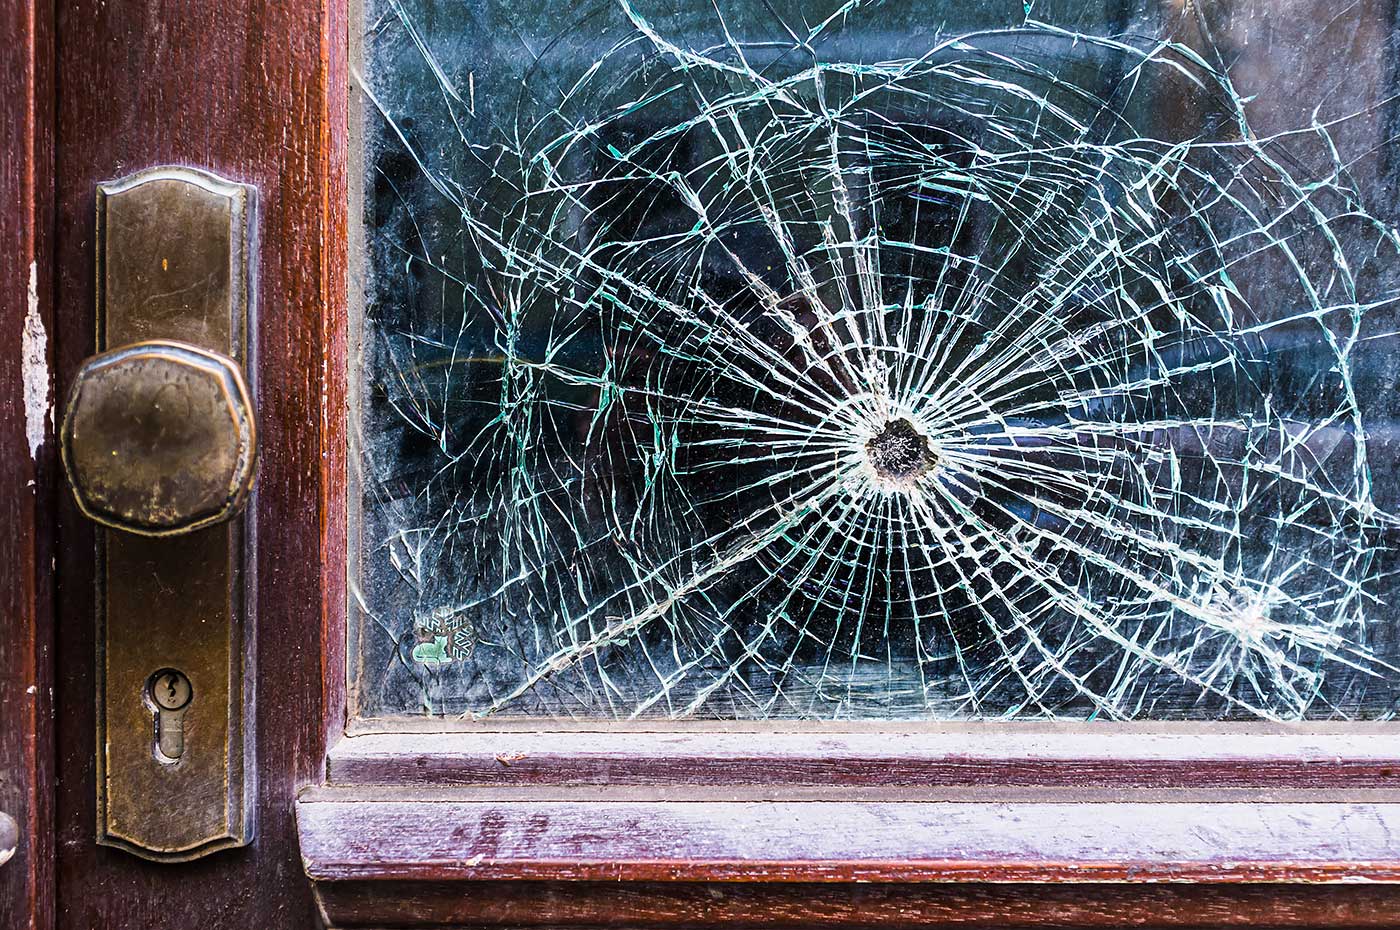 The pane used to be less broken